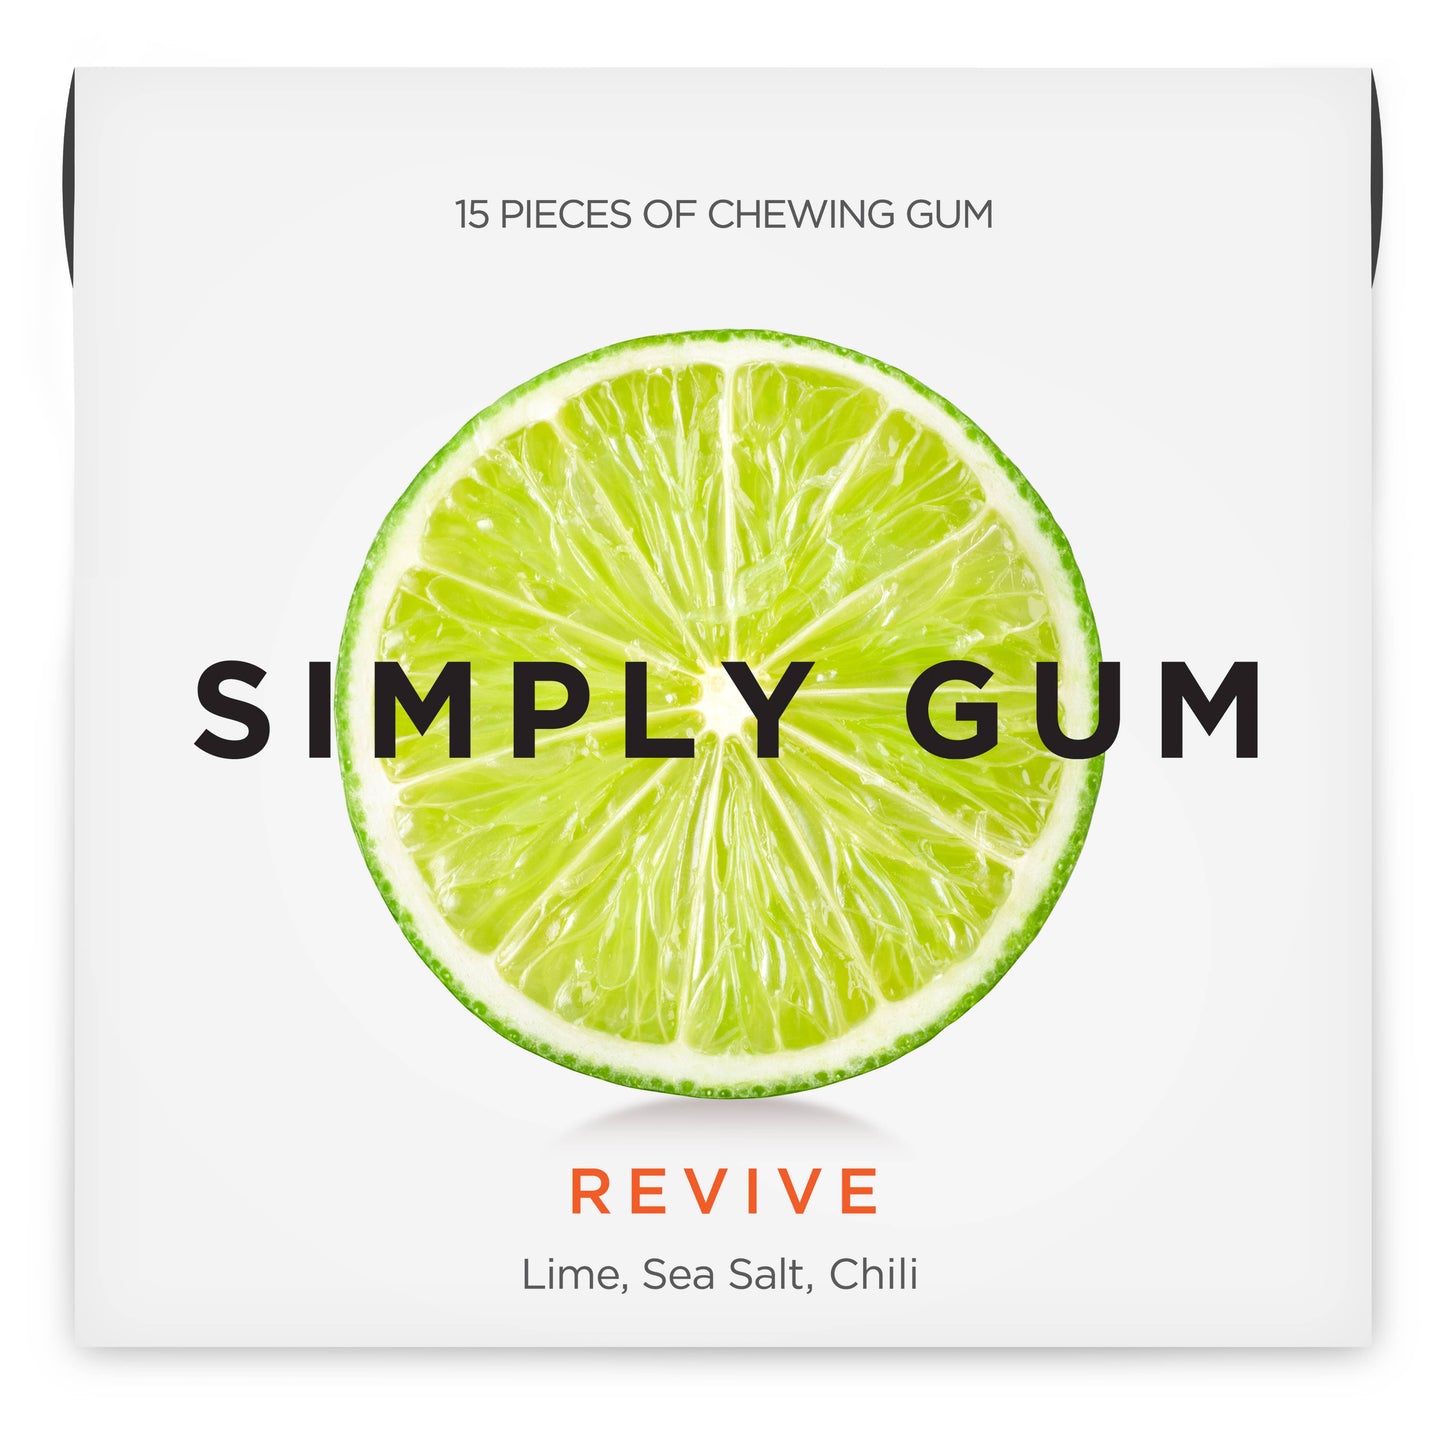 Simply Gum - Revive Natural Chewing Gum